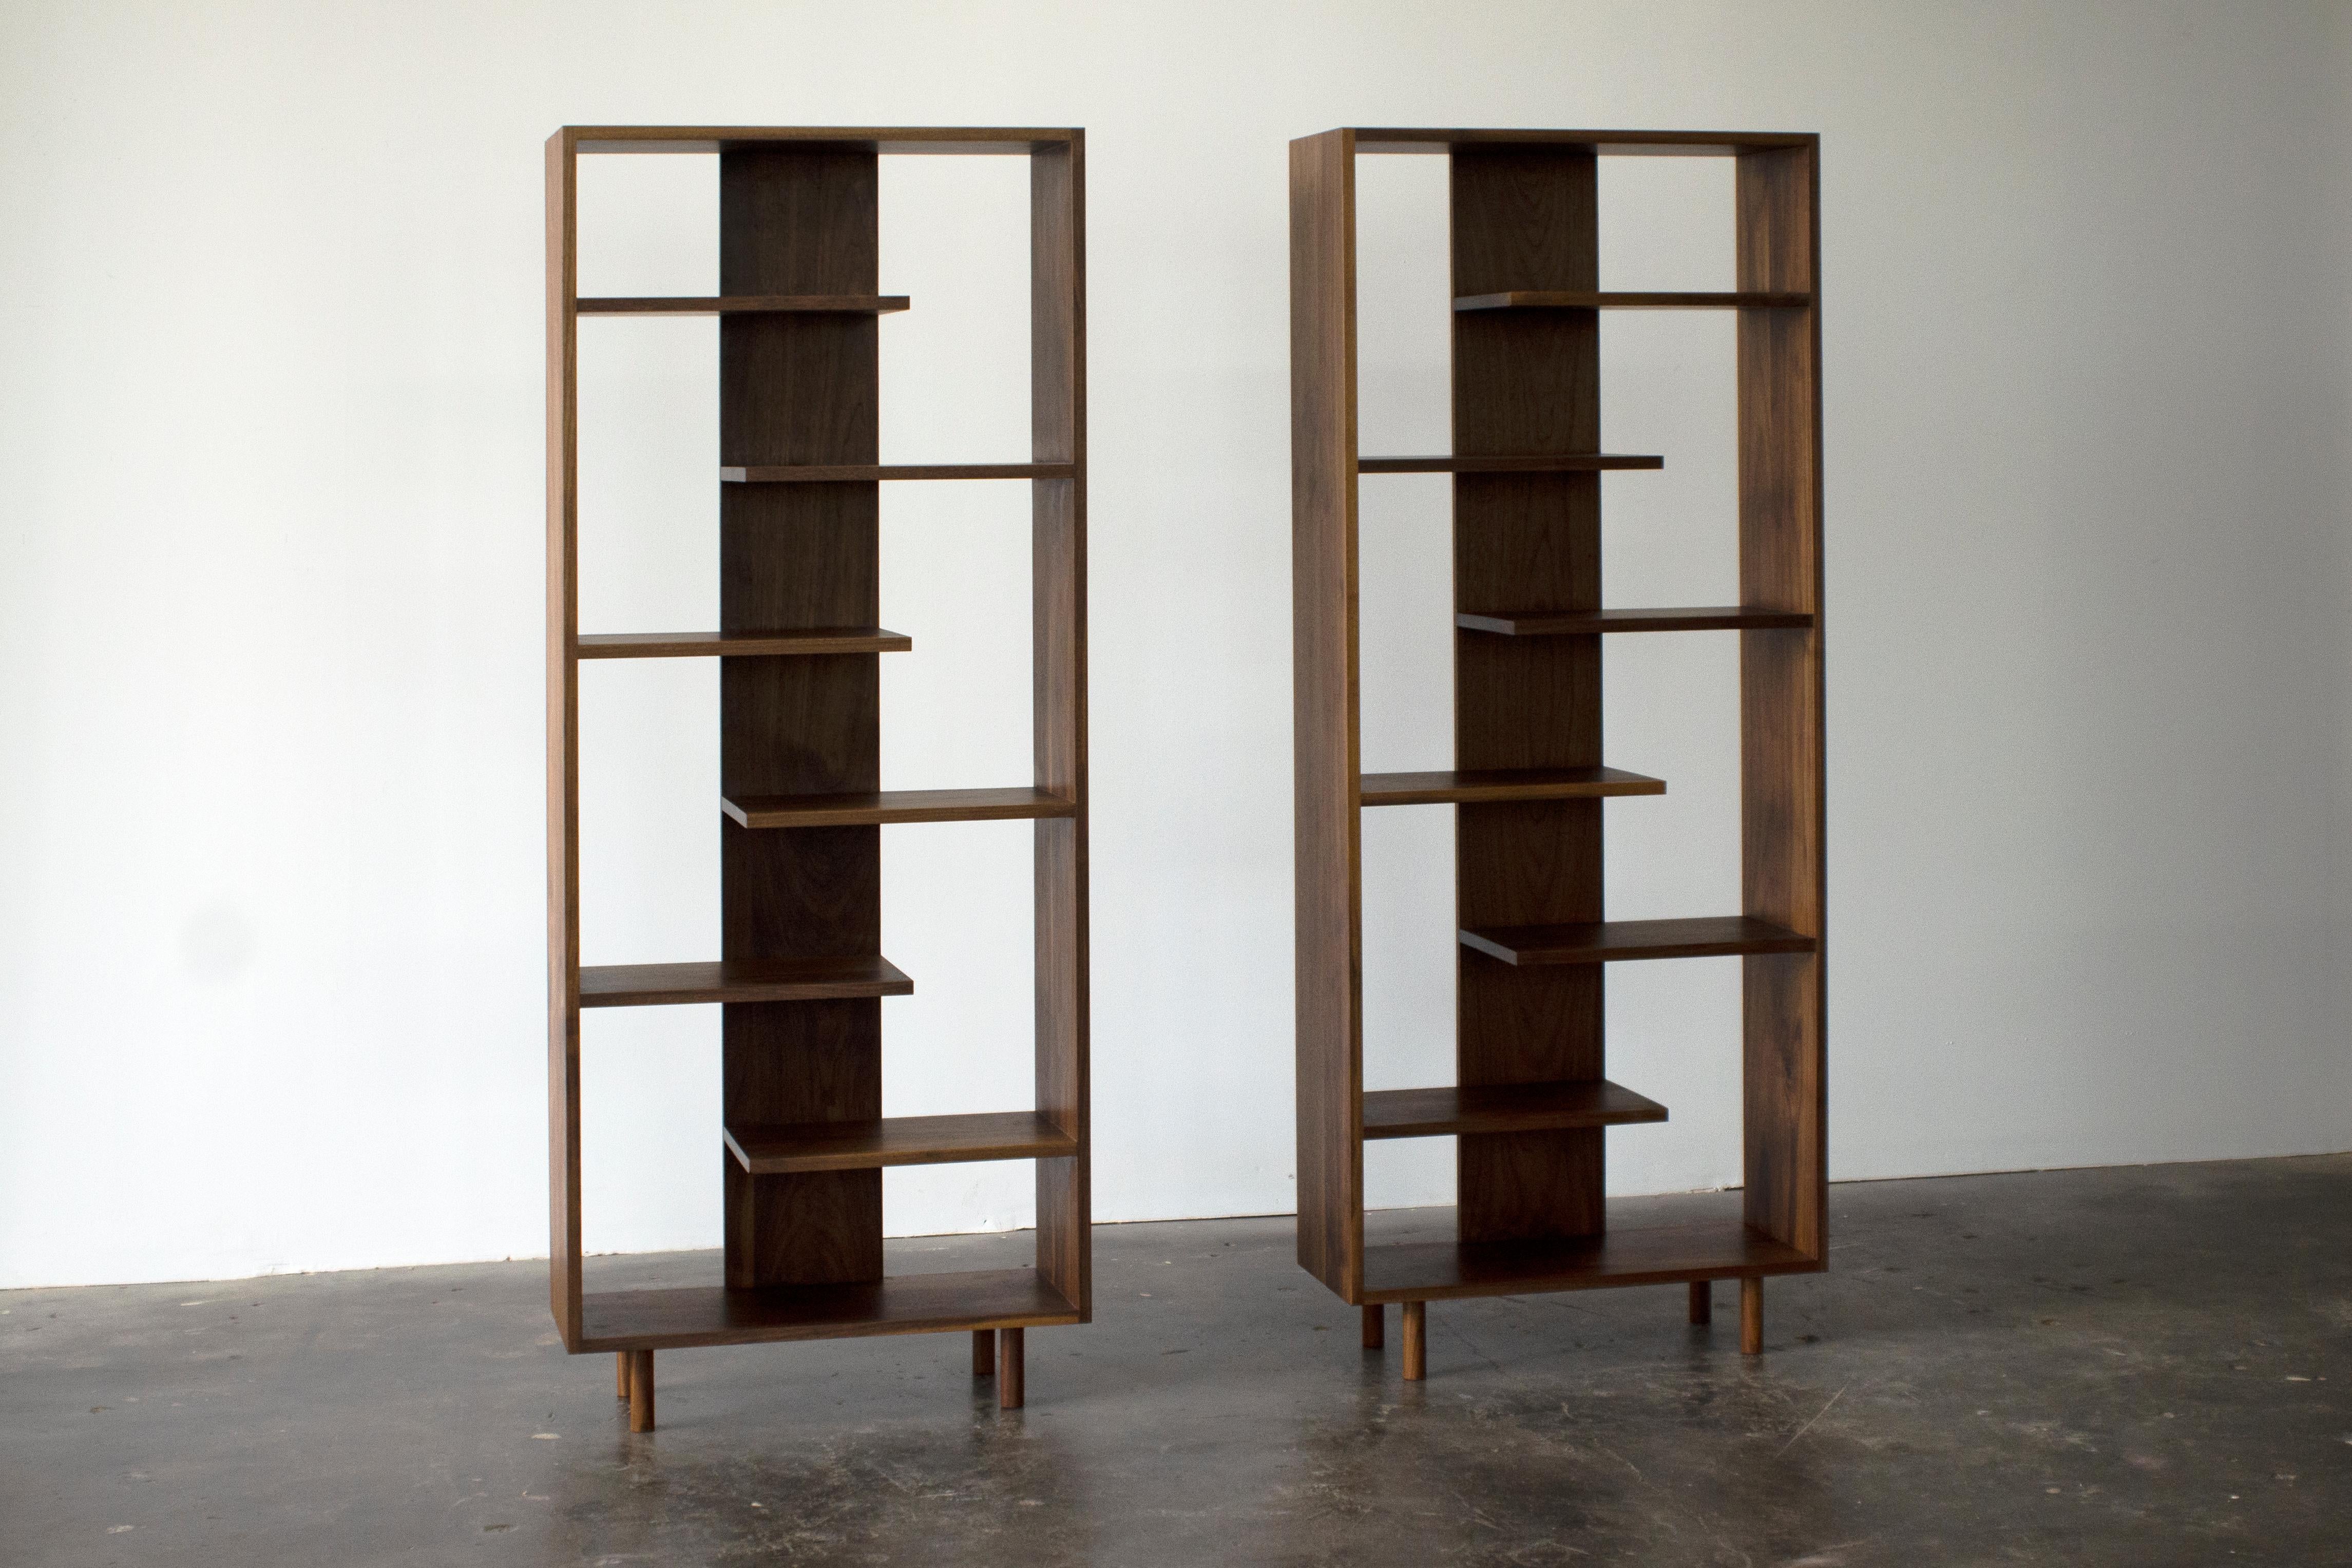 Paso shelving was designed to embody simplicity and harmony through the use of rhythmical geometries and warm natural materials. Alternating ladder-like shelves create discrete sections which are ideal for displaying favorite books and objects. This